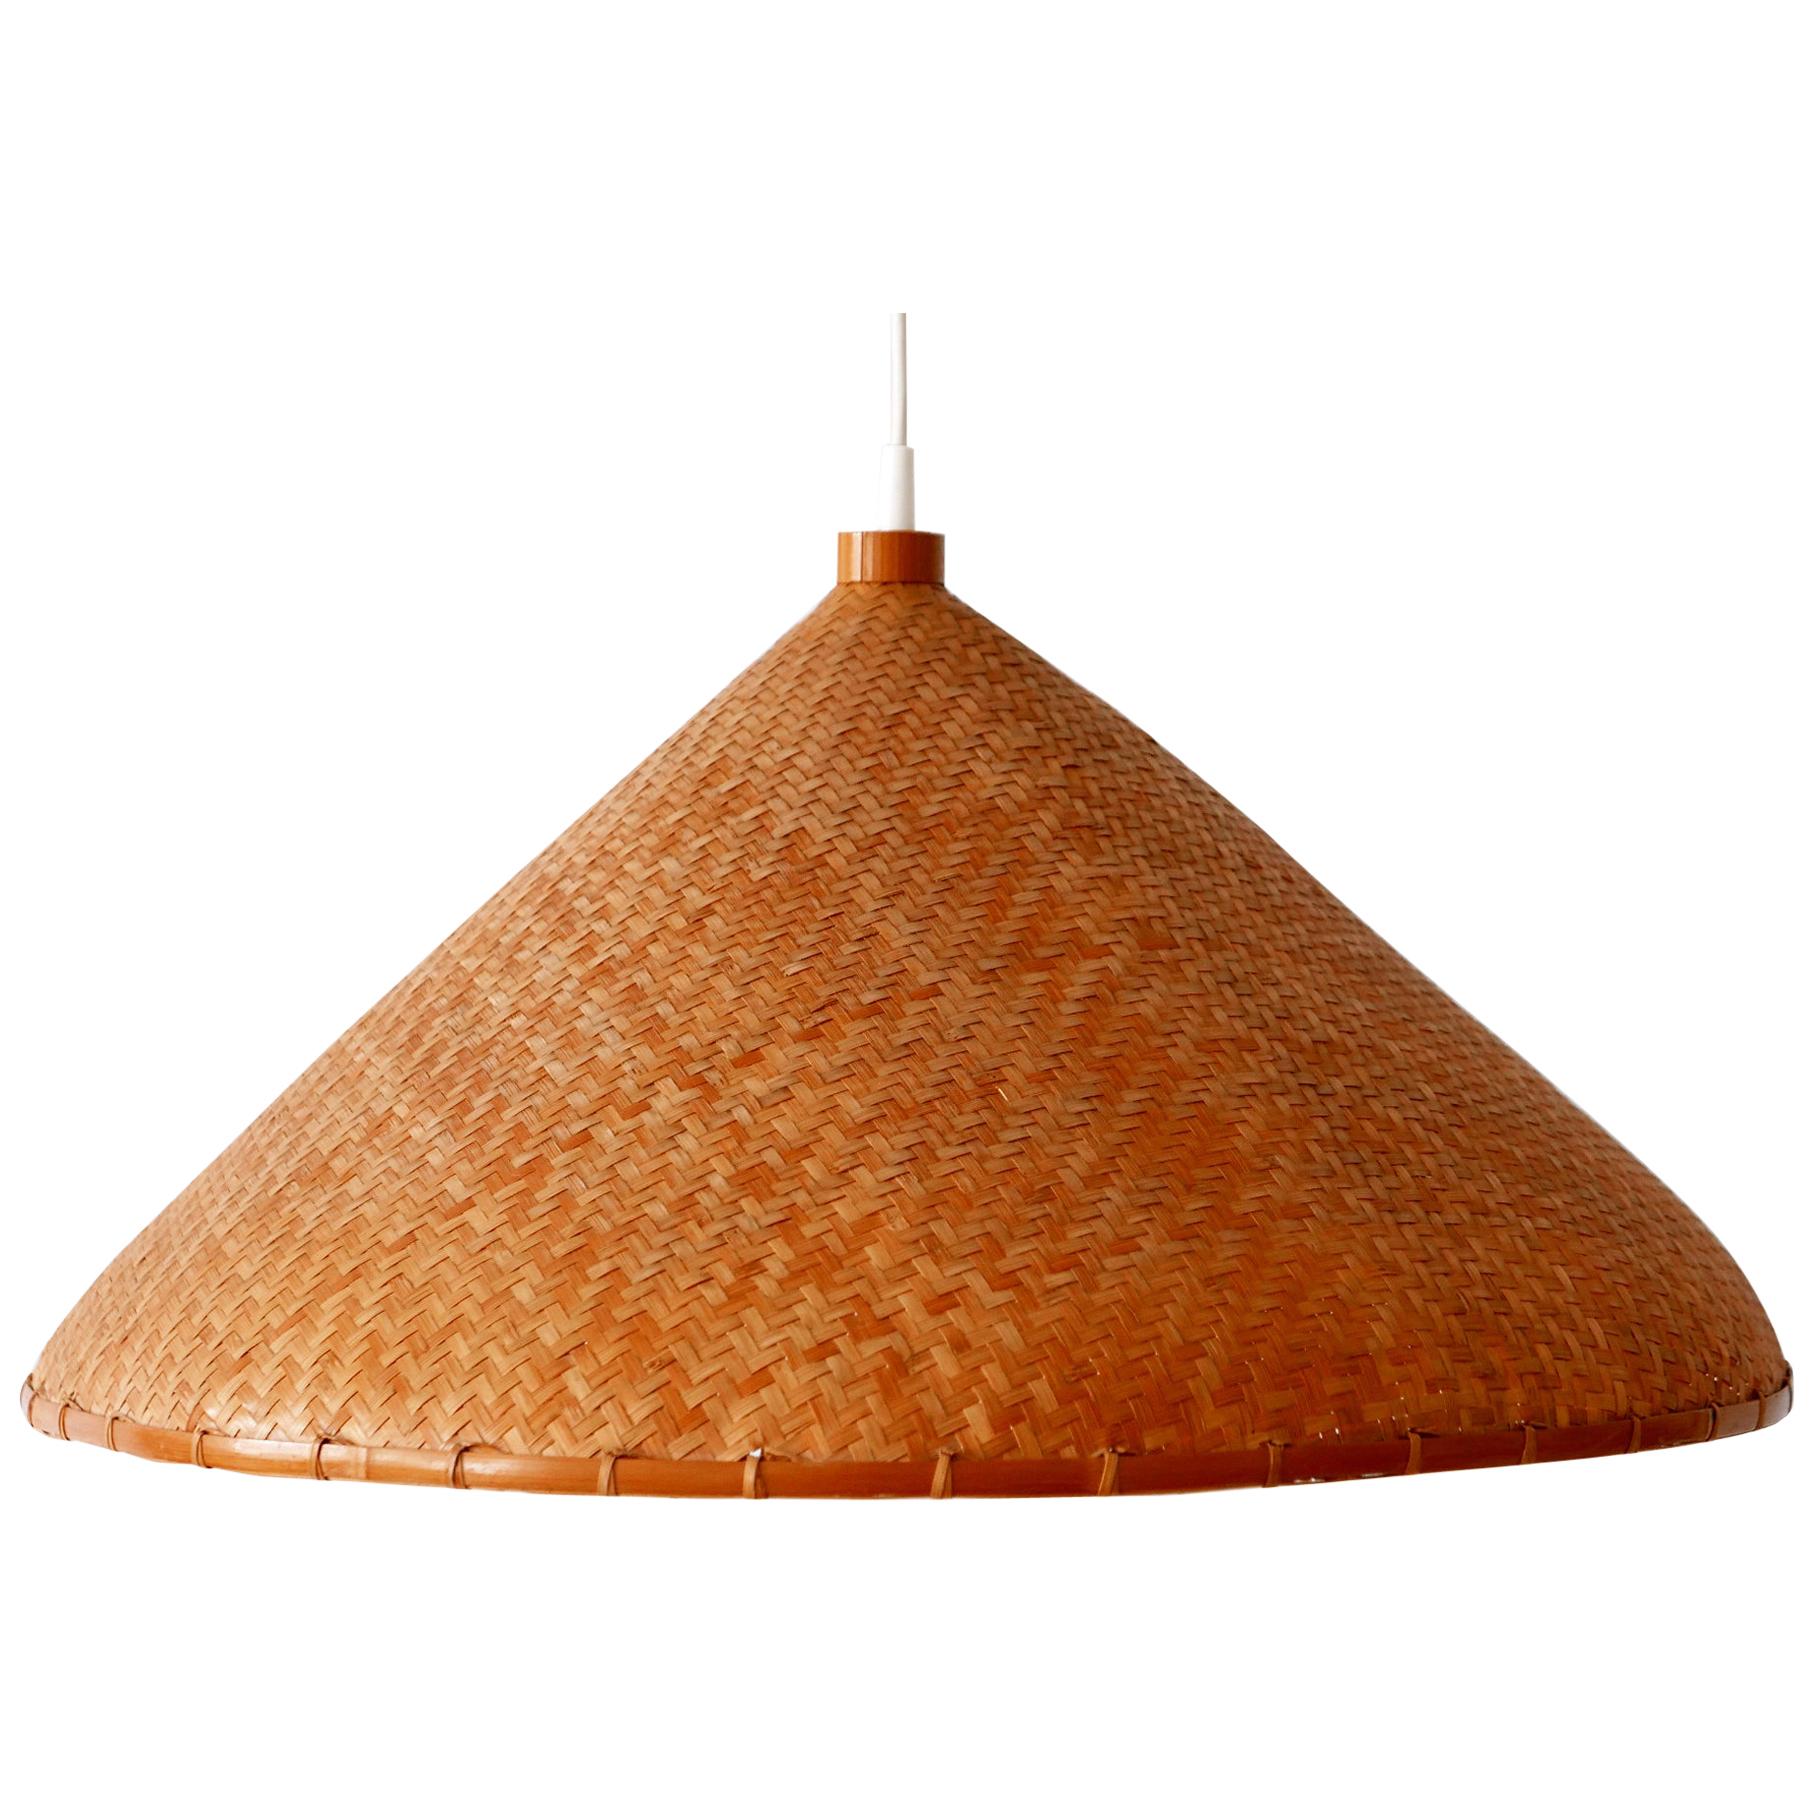 Large Mid-Century Modern Wicker Pendant Lamp or Hanging Light, Germany, 1960s